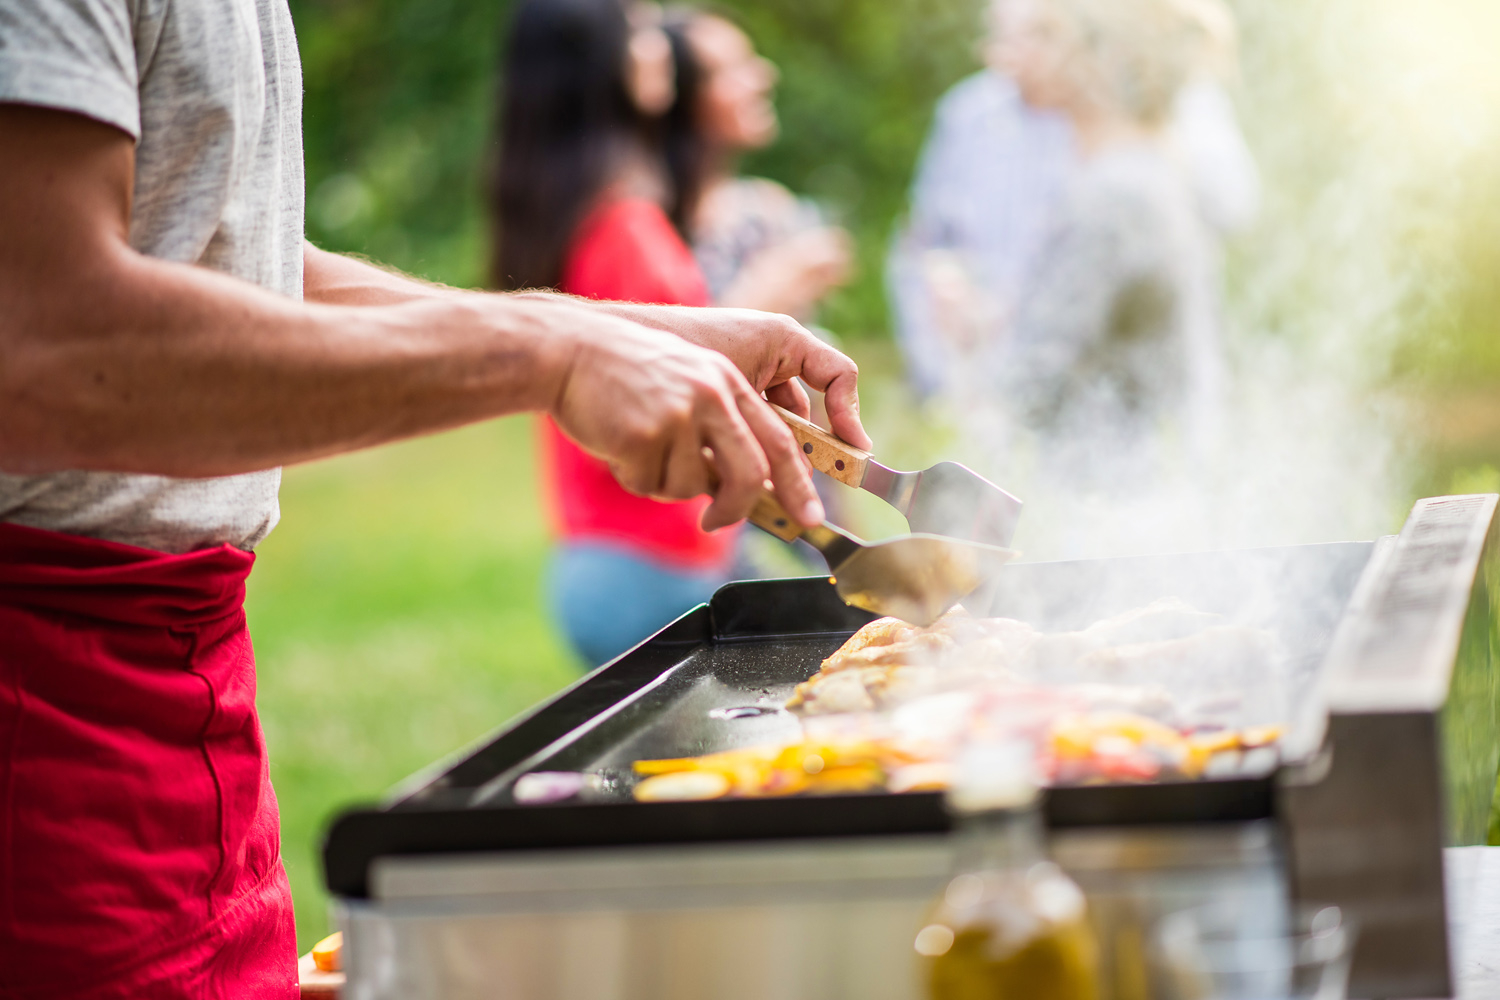 BBQ Beginners Must See! Recommend BBQ Options by Nutritionist.